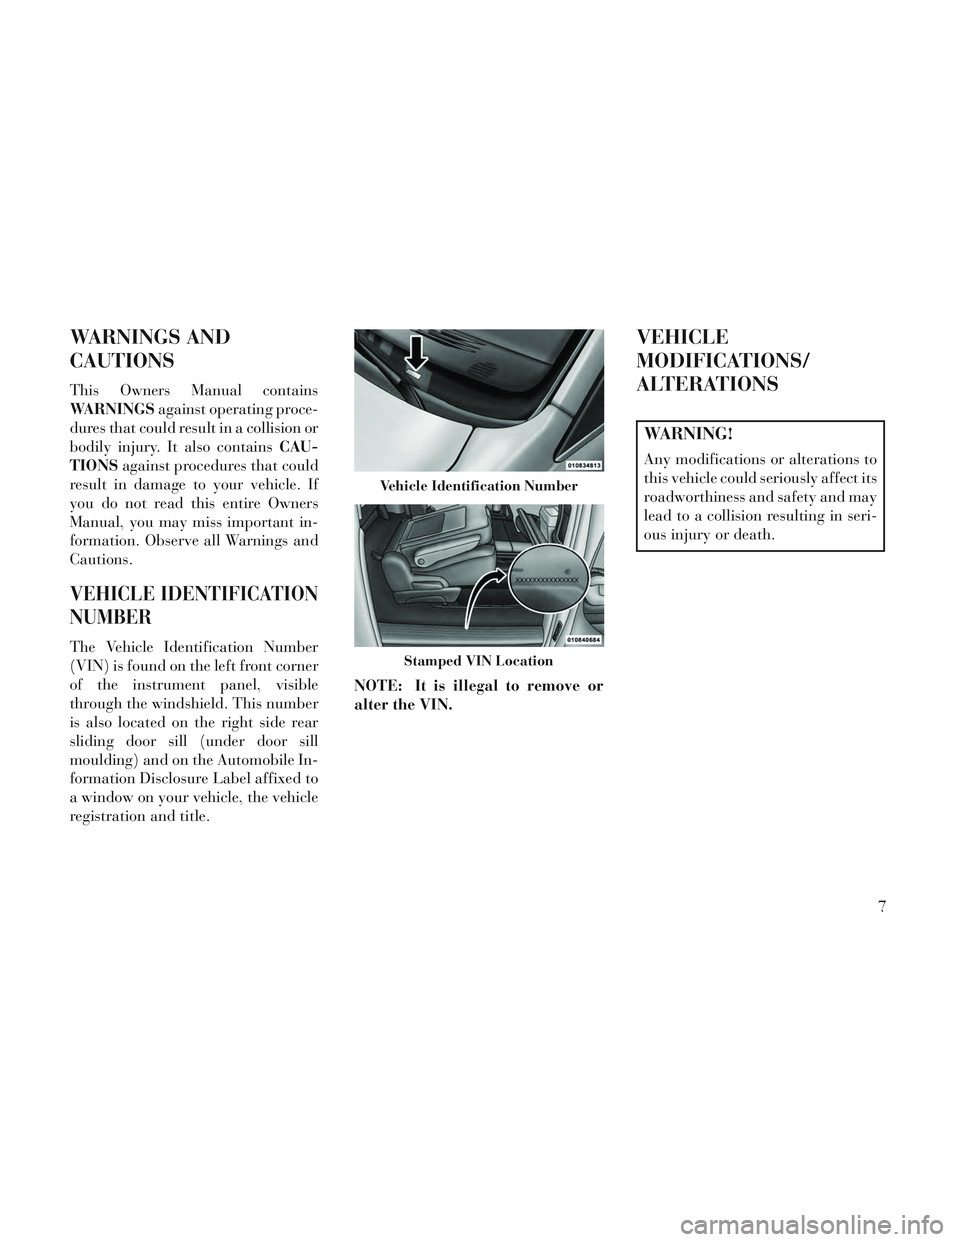 Lancia Voyager 2014  Owner handbook (in English) WARNINGS AND
CAUTIONS
This Owners Manual contains
WARNINGSagainst operating proce-
dures that could result in a collision or
bodily injury. It also contains CAU-
TIONS against procedures that could
re